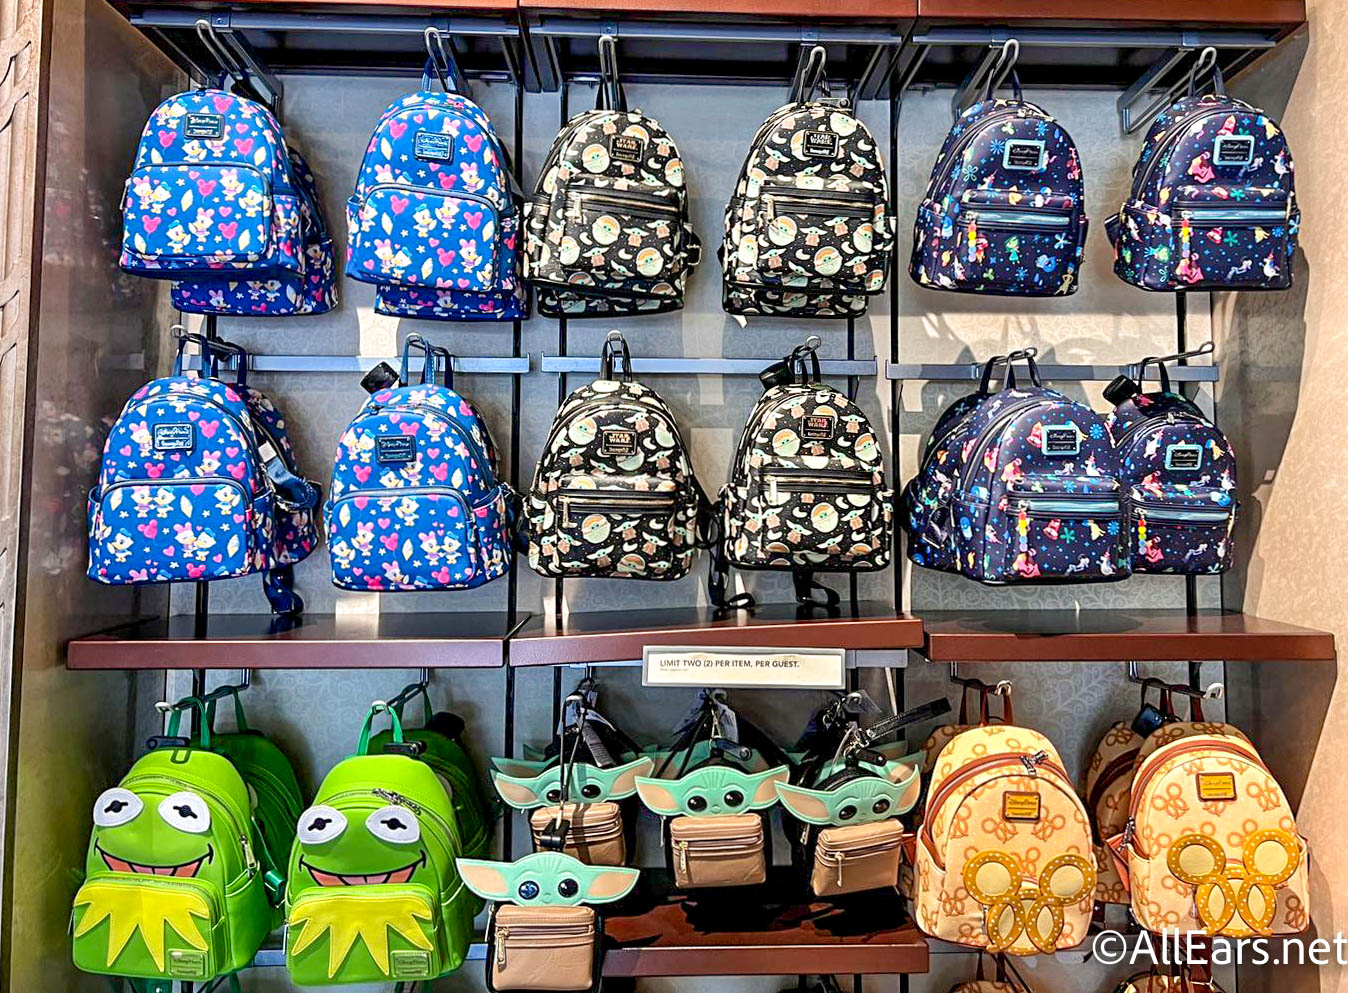 We're All Mad Here Backpack (Books-A-Million Exclusive) Loungefly